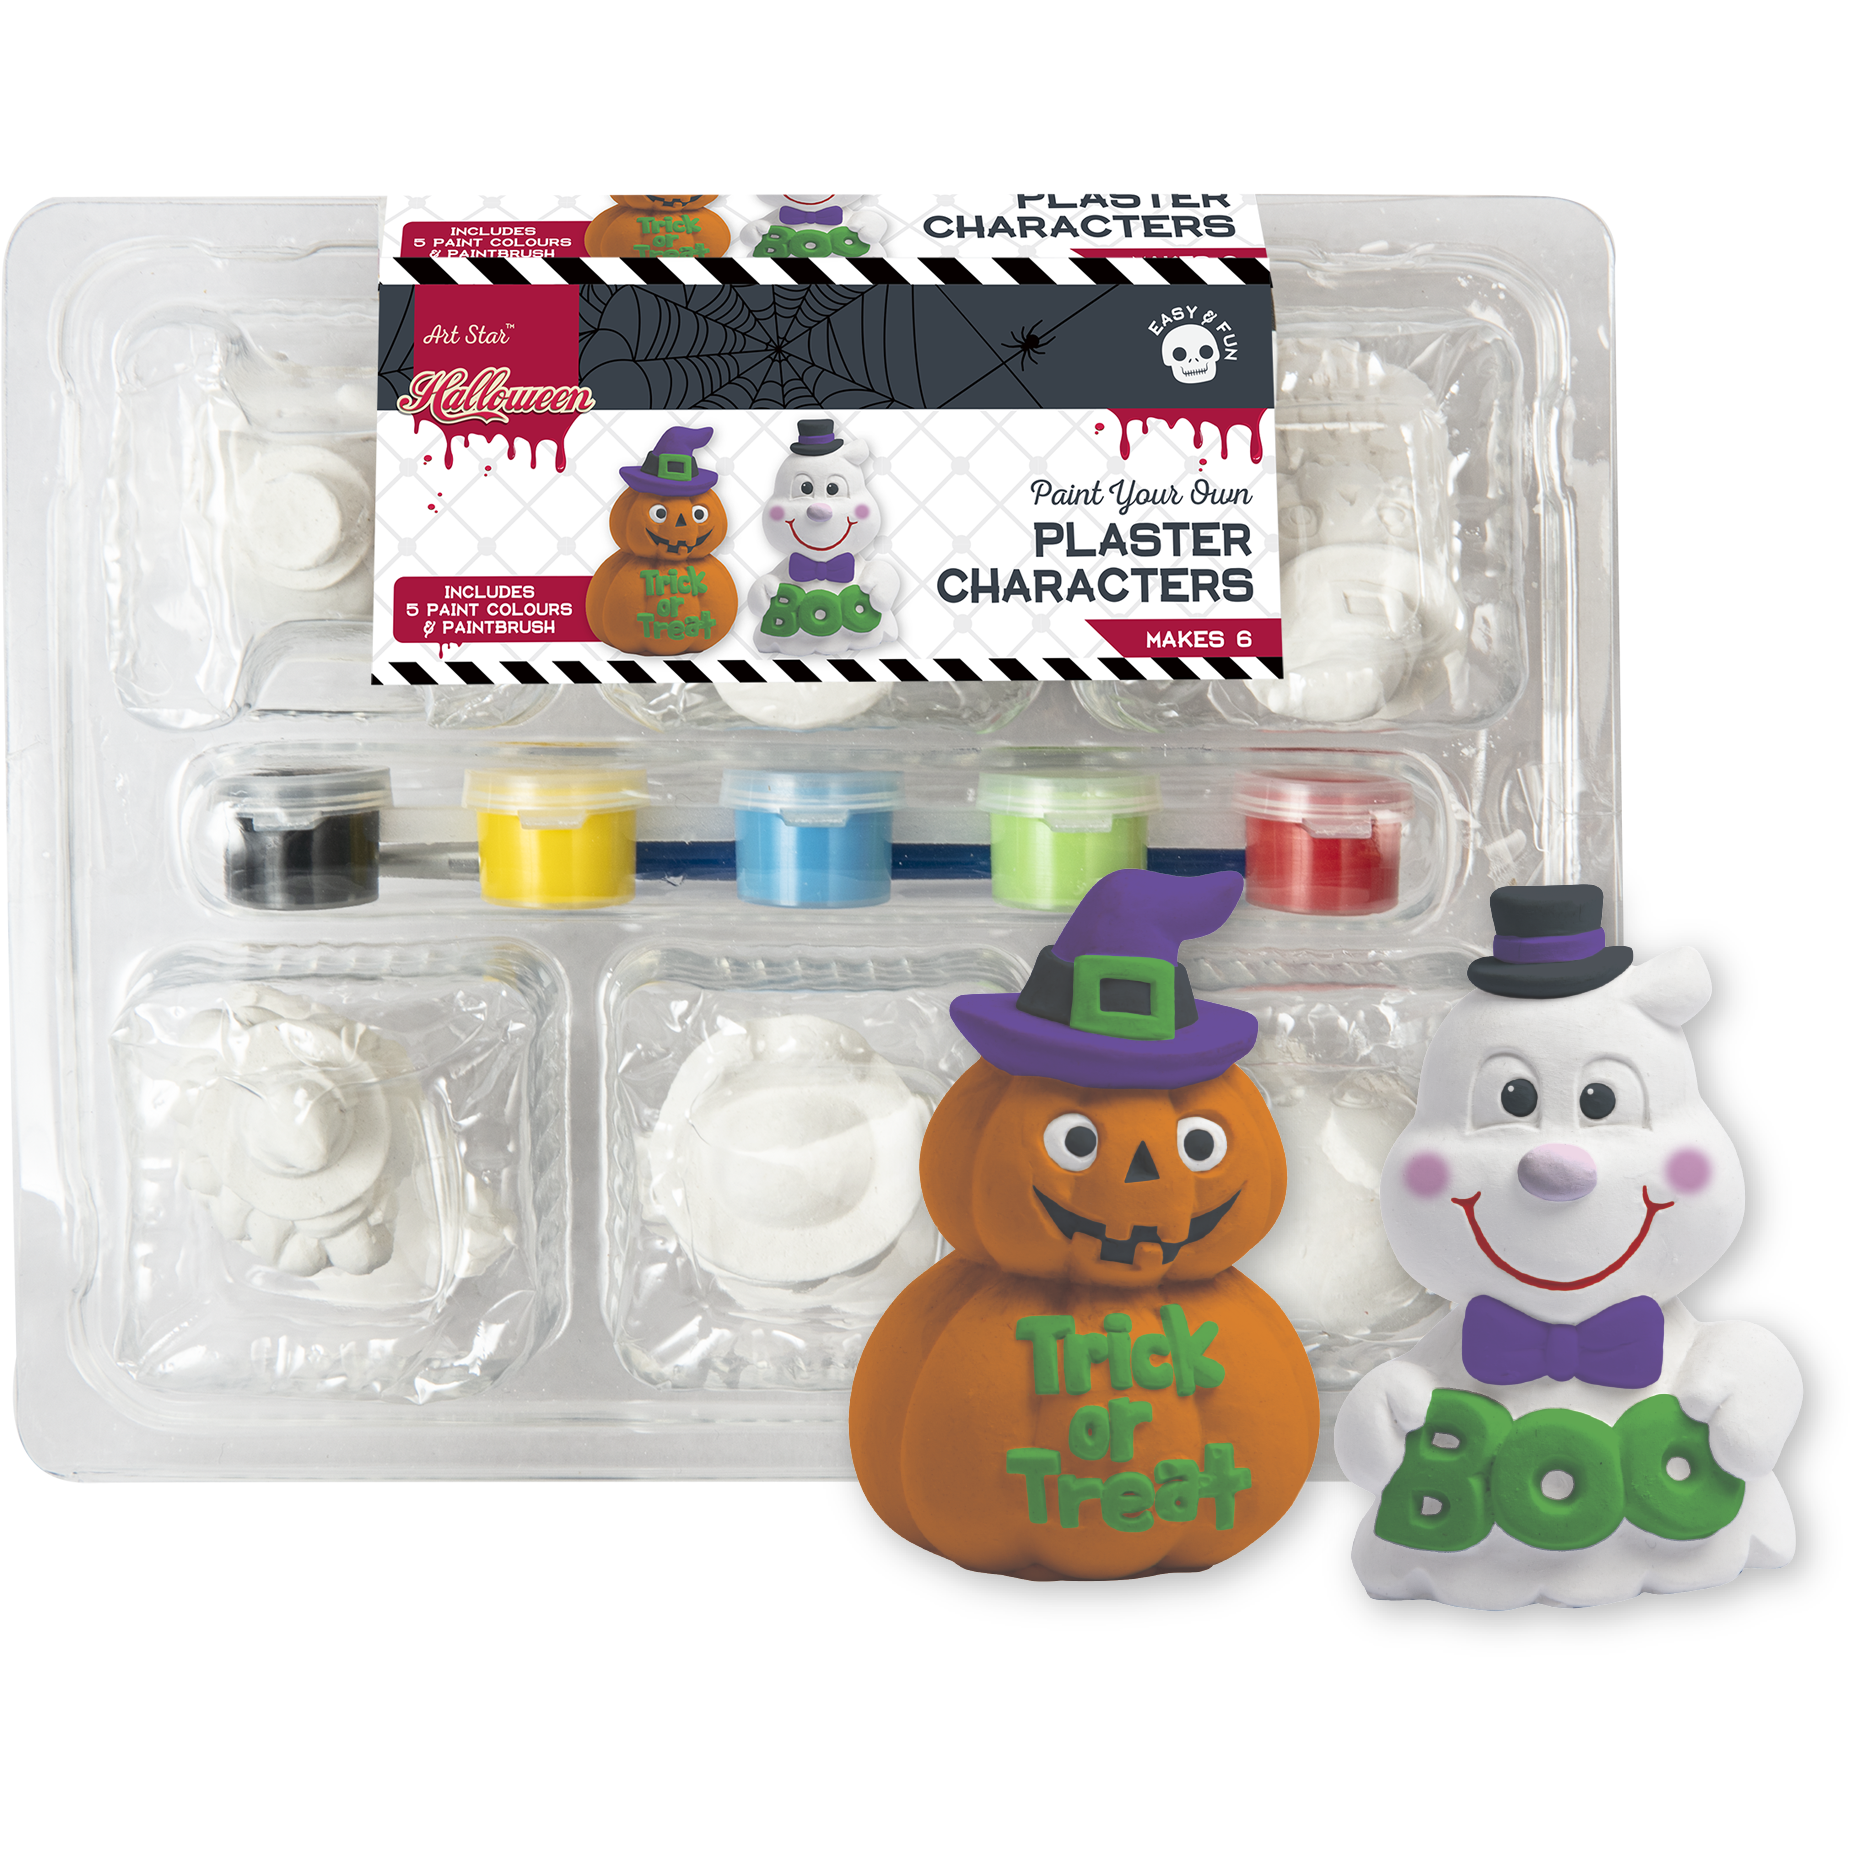 Image of Art Star Halloween Paint Your Own Plaster Characters-7cm (Makes 6)